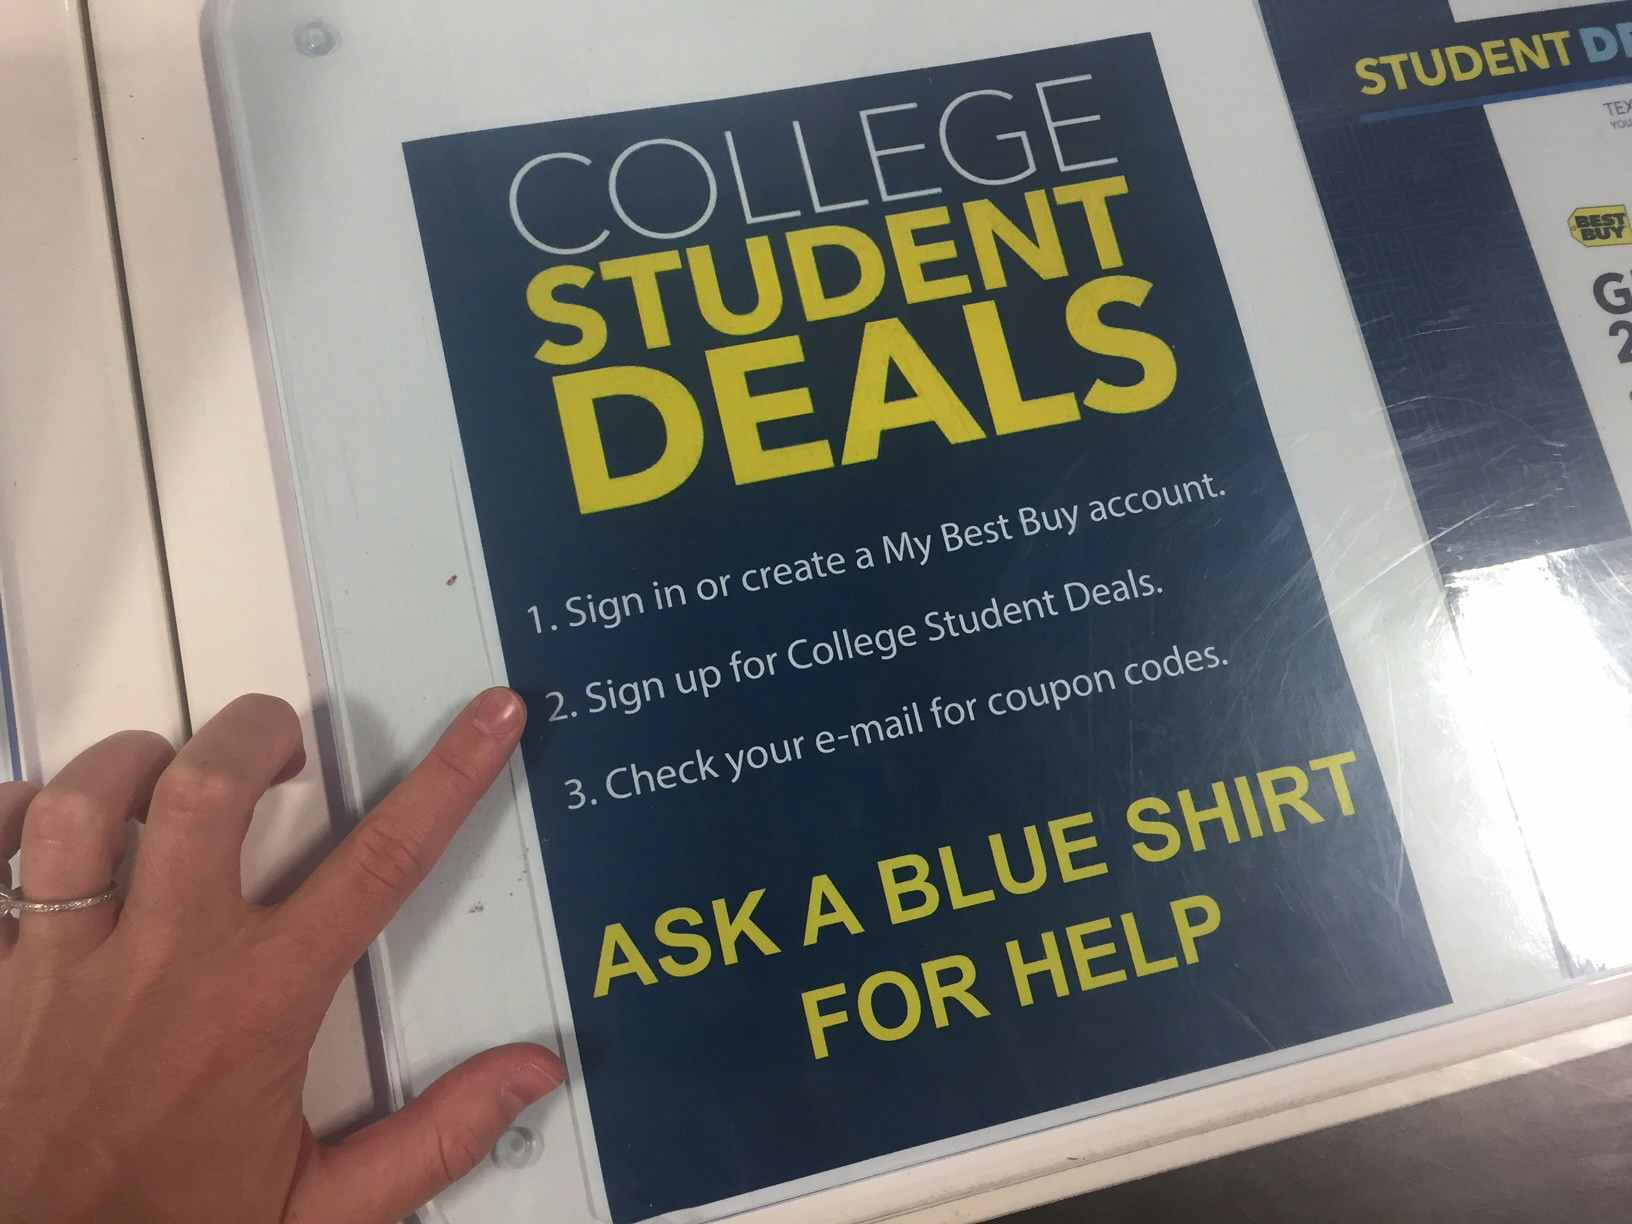 https://prod-cdn-thekrazycouponlady.imgix.net/wp-content/uploads/2017/09/best-buy-college-students.jpg?auto=format&fit=fill&q=25